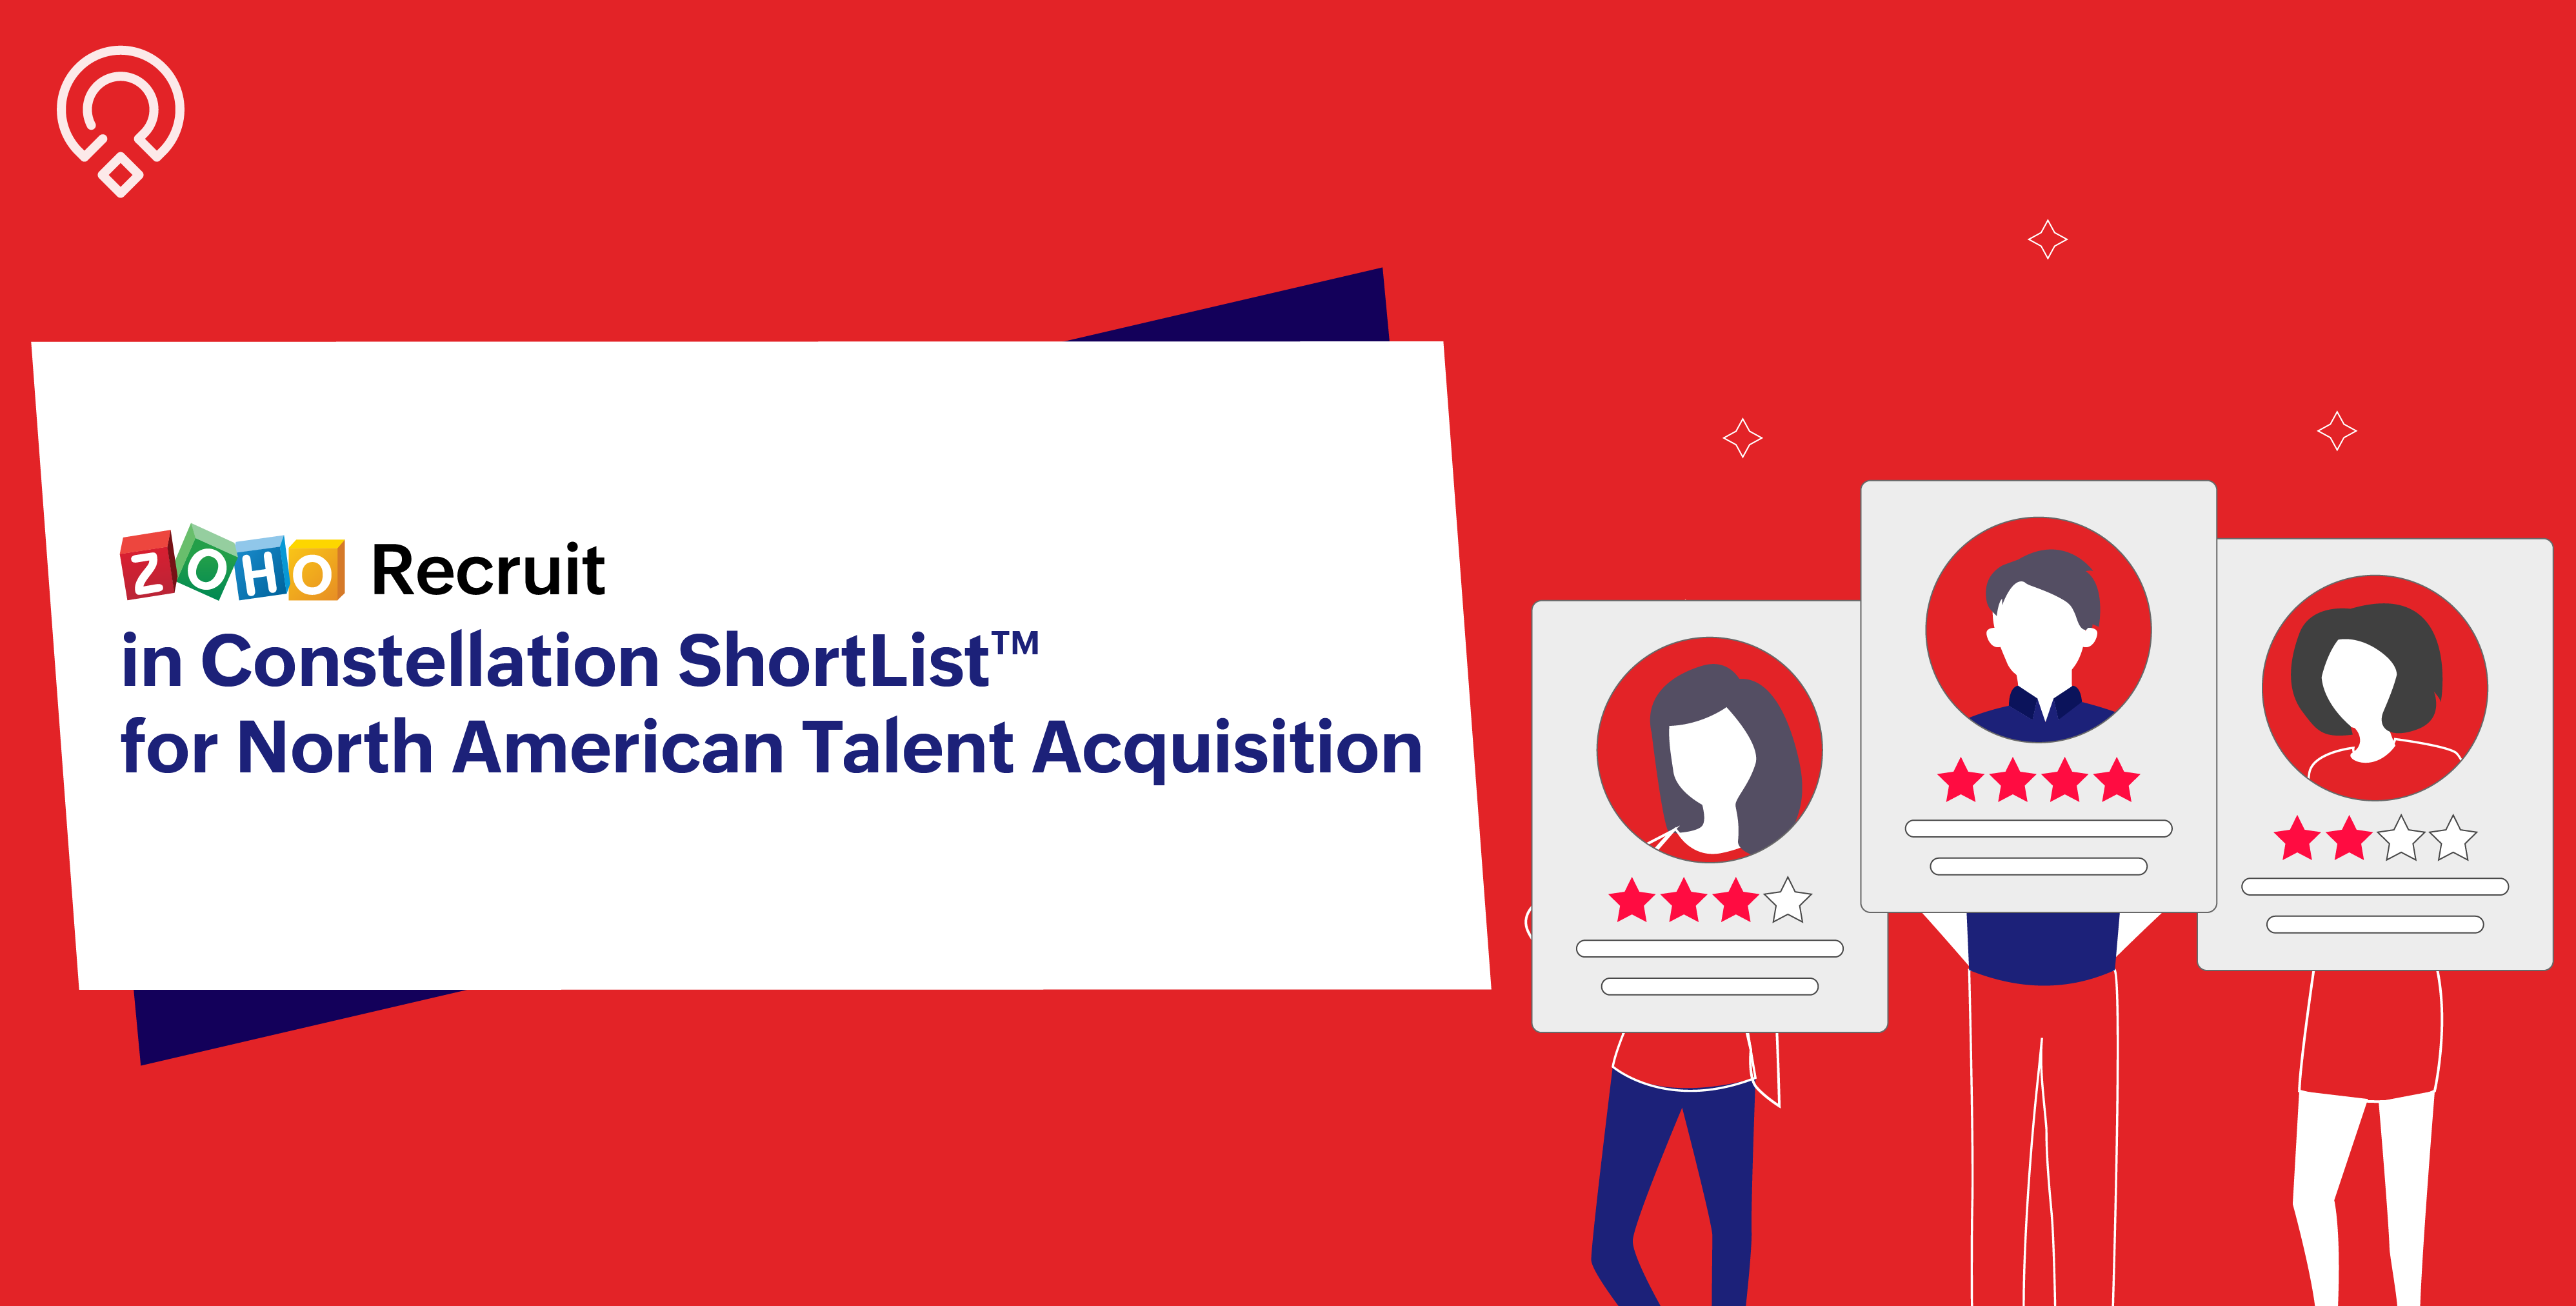 Constellation ShortList™ recognizes Zoho Recruit as a Leading Talent Acquisition Solution